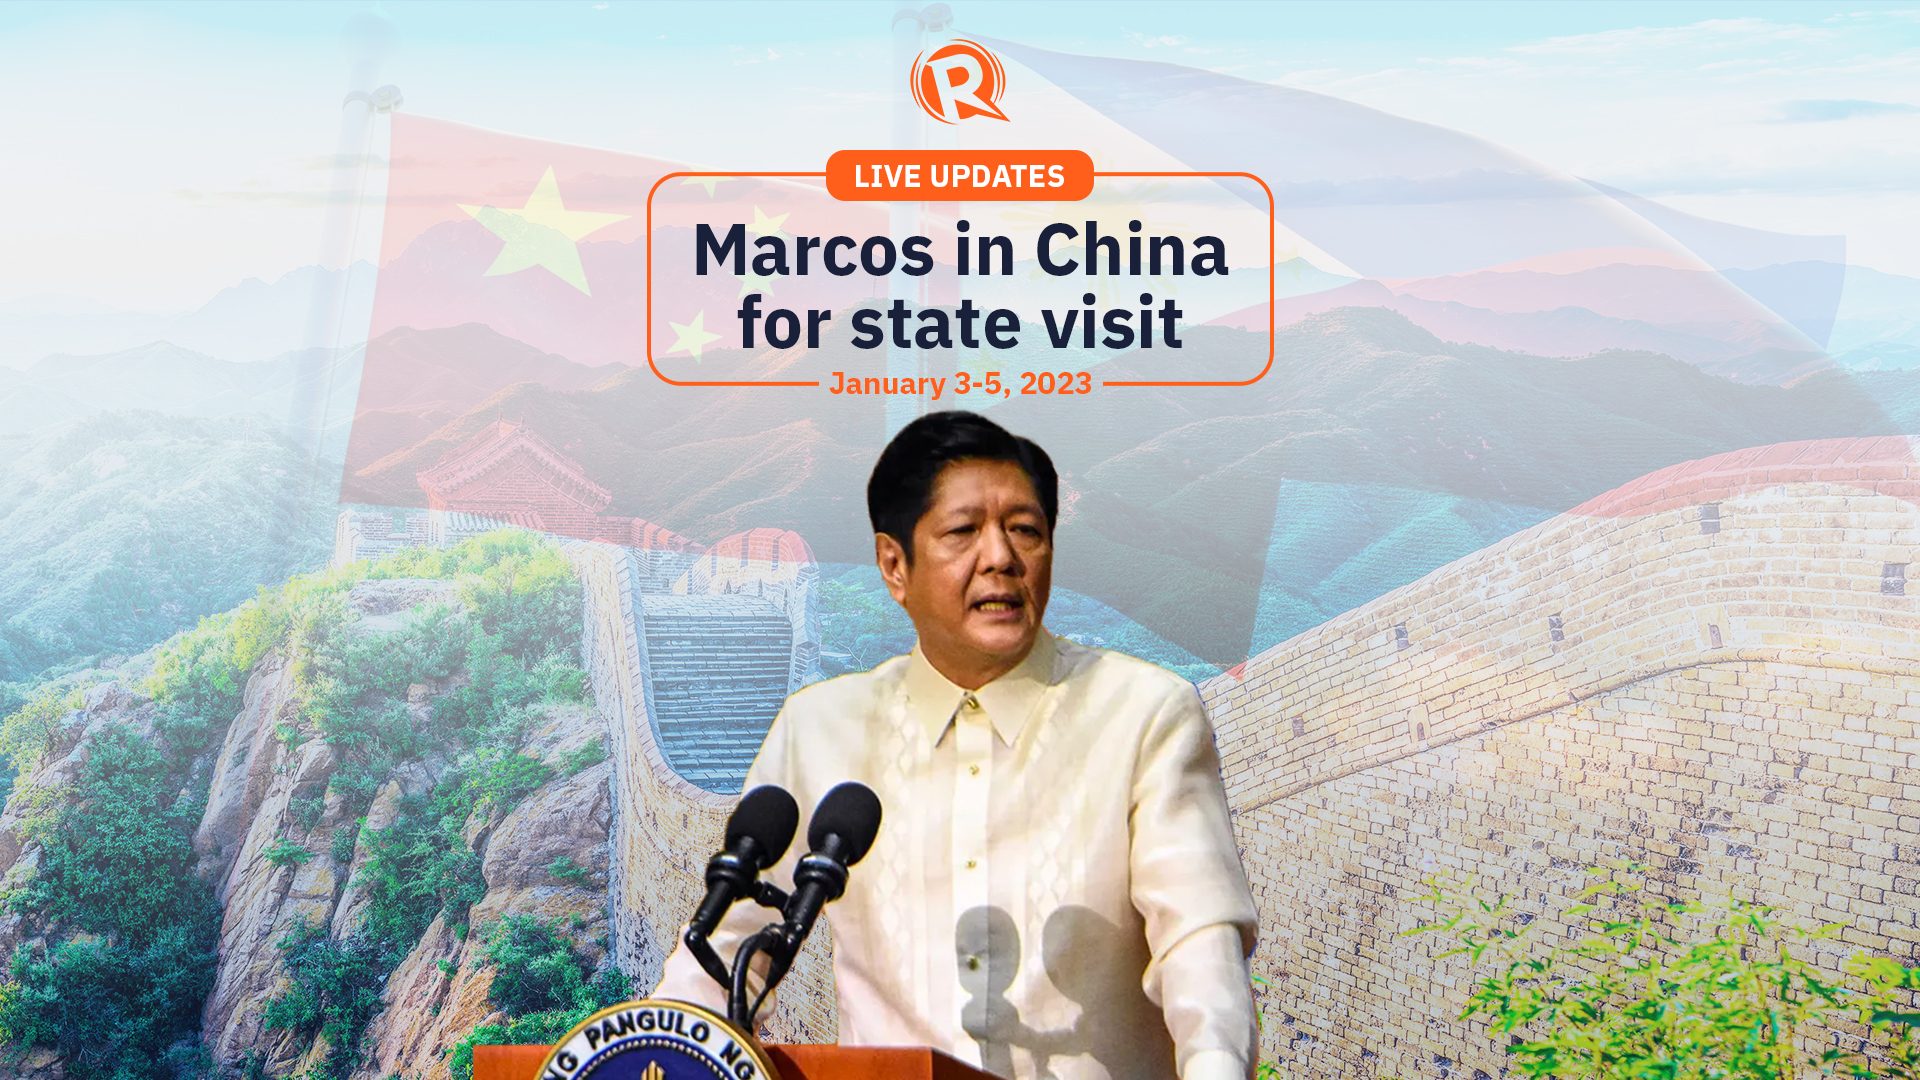 LIVE UPDATES: Marcos state visit to China